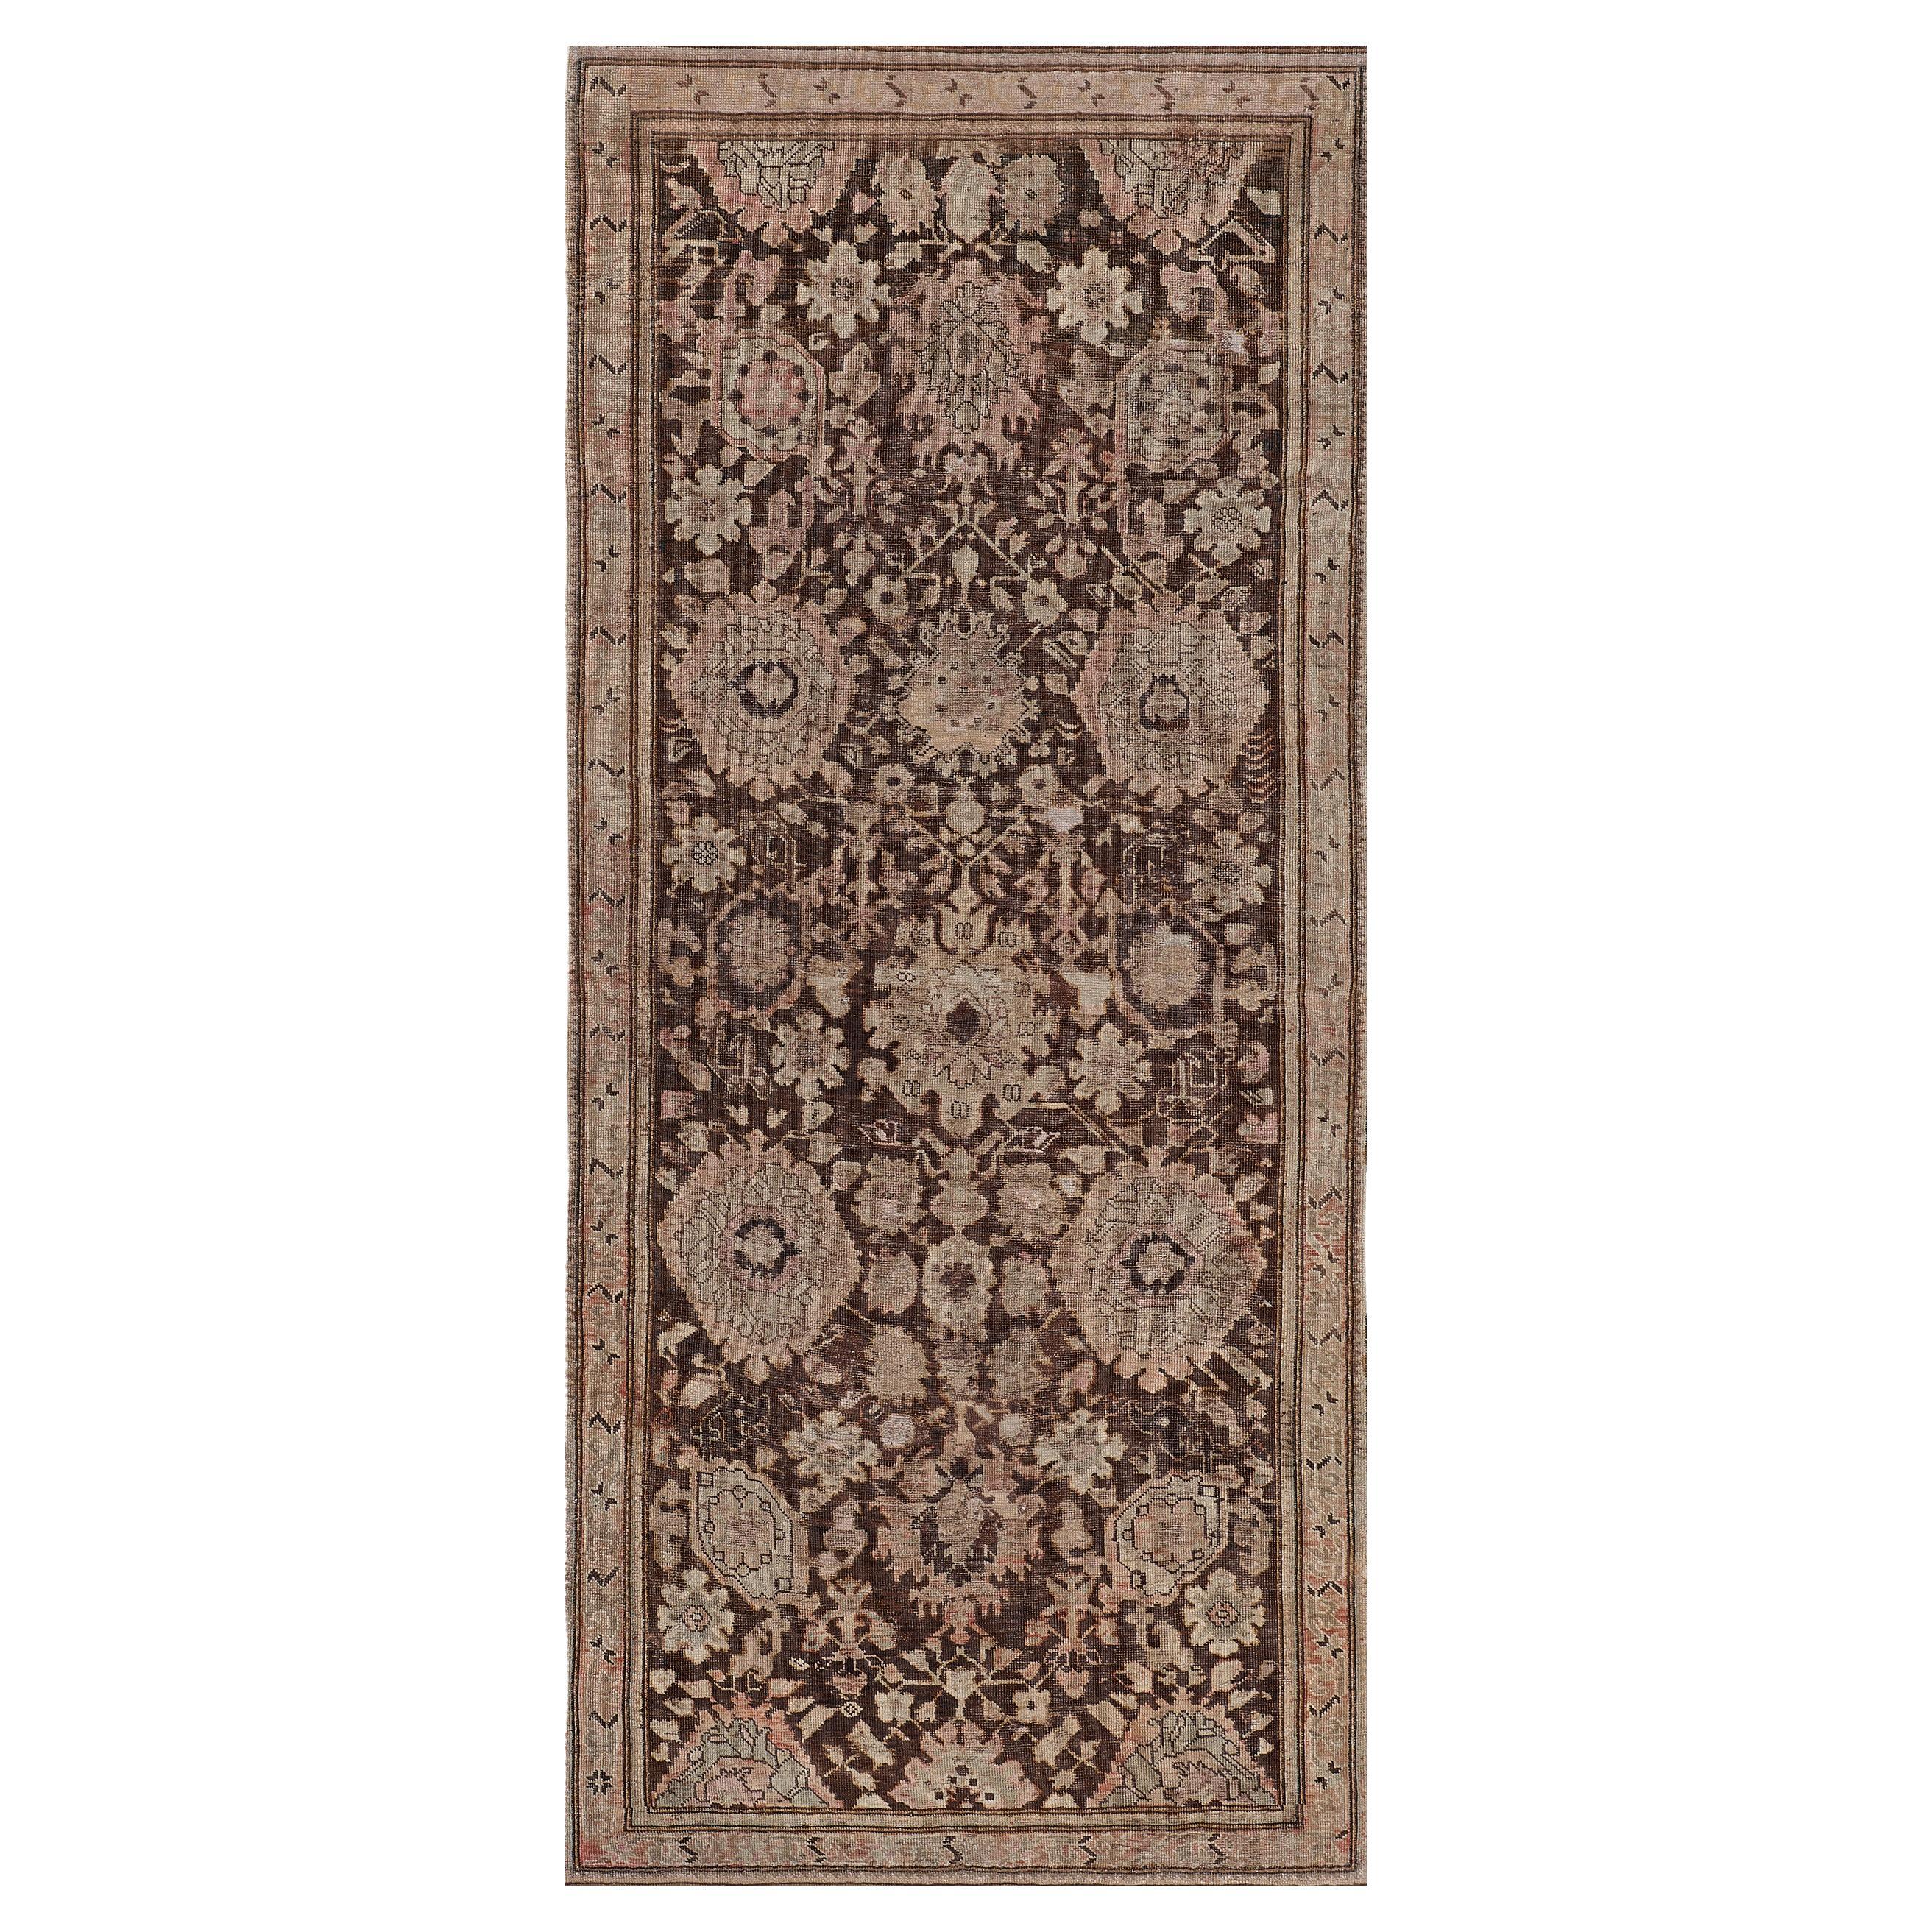 Chocolate-Brown Traditional Handwoven Wool Persian Karabagh Runner For Sale